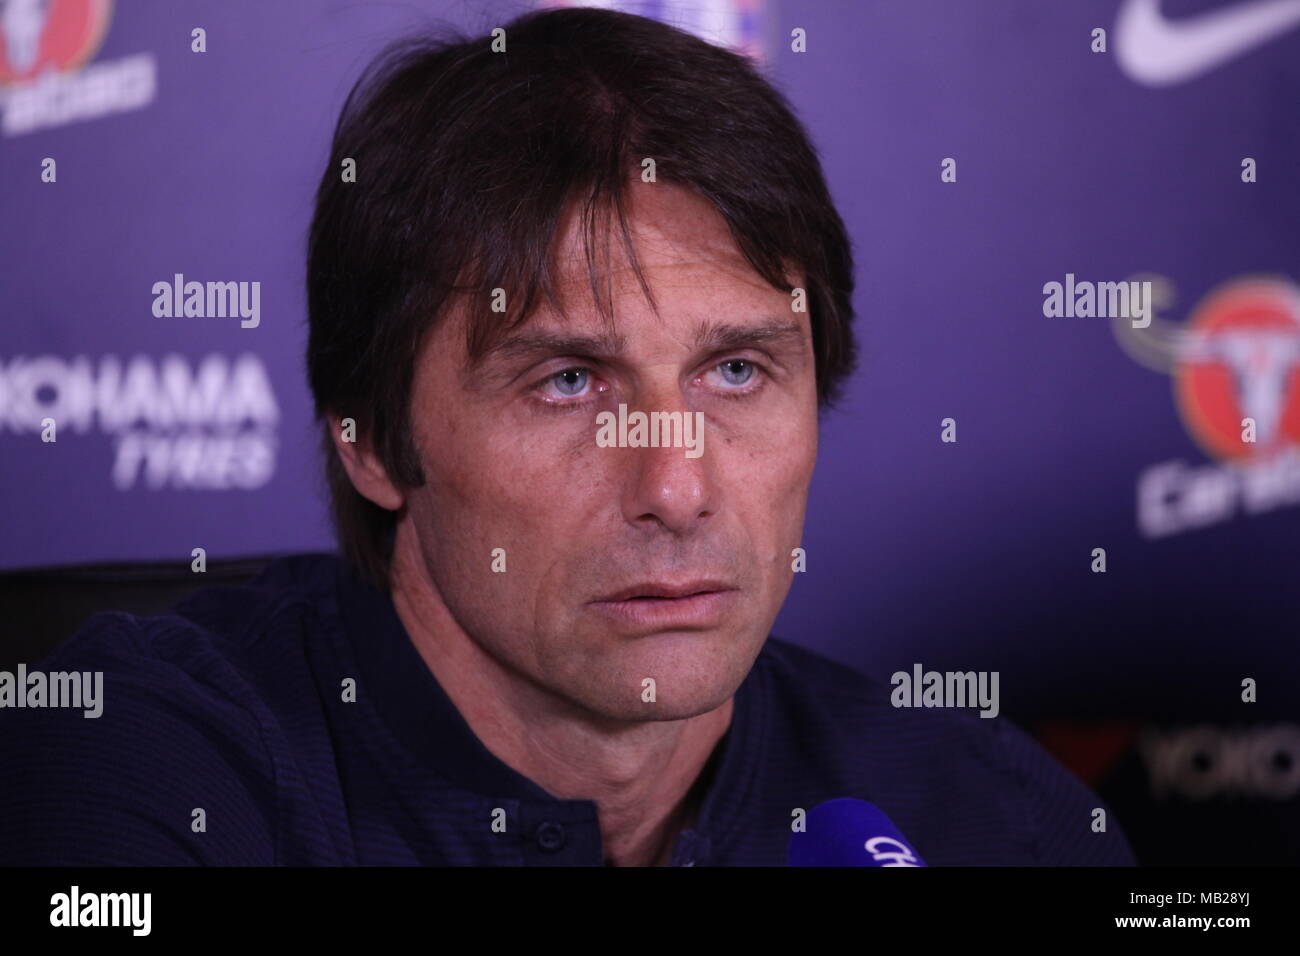 Cobham, Surrey, UK  6th Apr, 2018  Antonio Conte, Chelsea Football Club's Manager, discusses his teams prospects in the  Premier League game against West Ham United FC., on Sunday. Credit: Motofoto/Alamy Live News Stock Photo